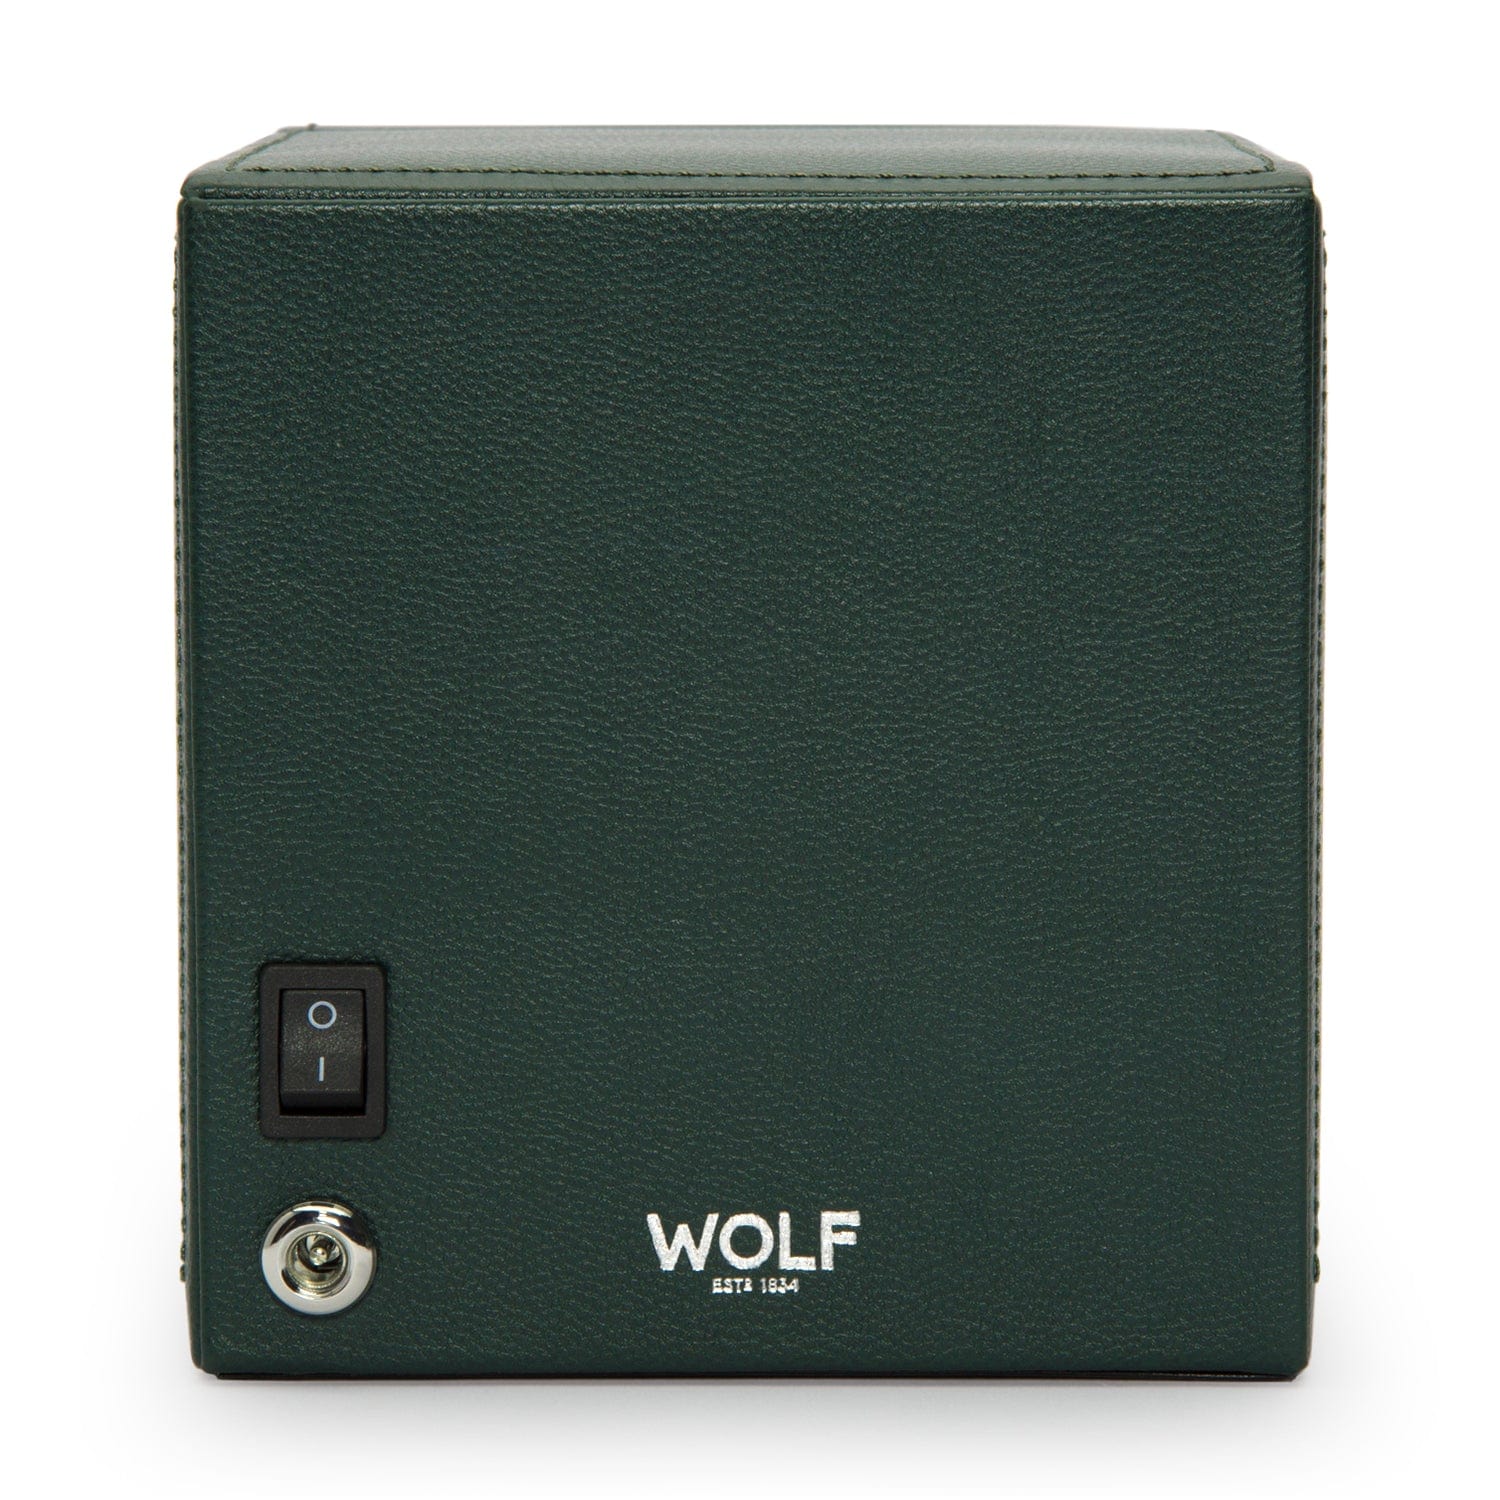 Wolf1834 Watch Winder Cub Single Watch Winder with Cover- Green